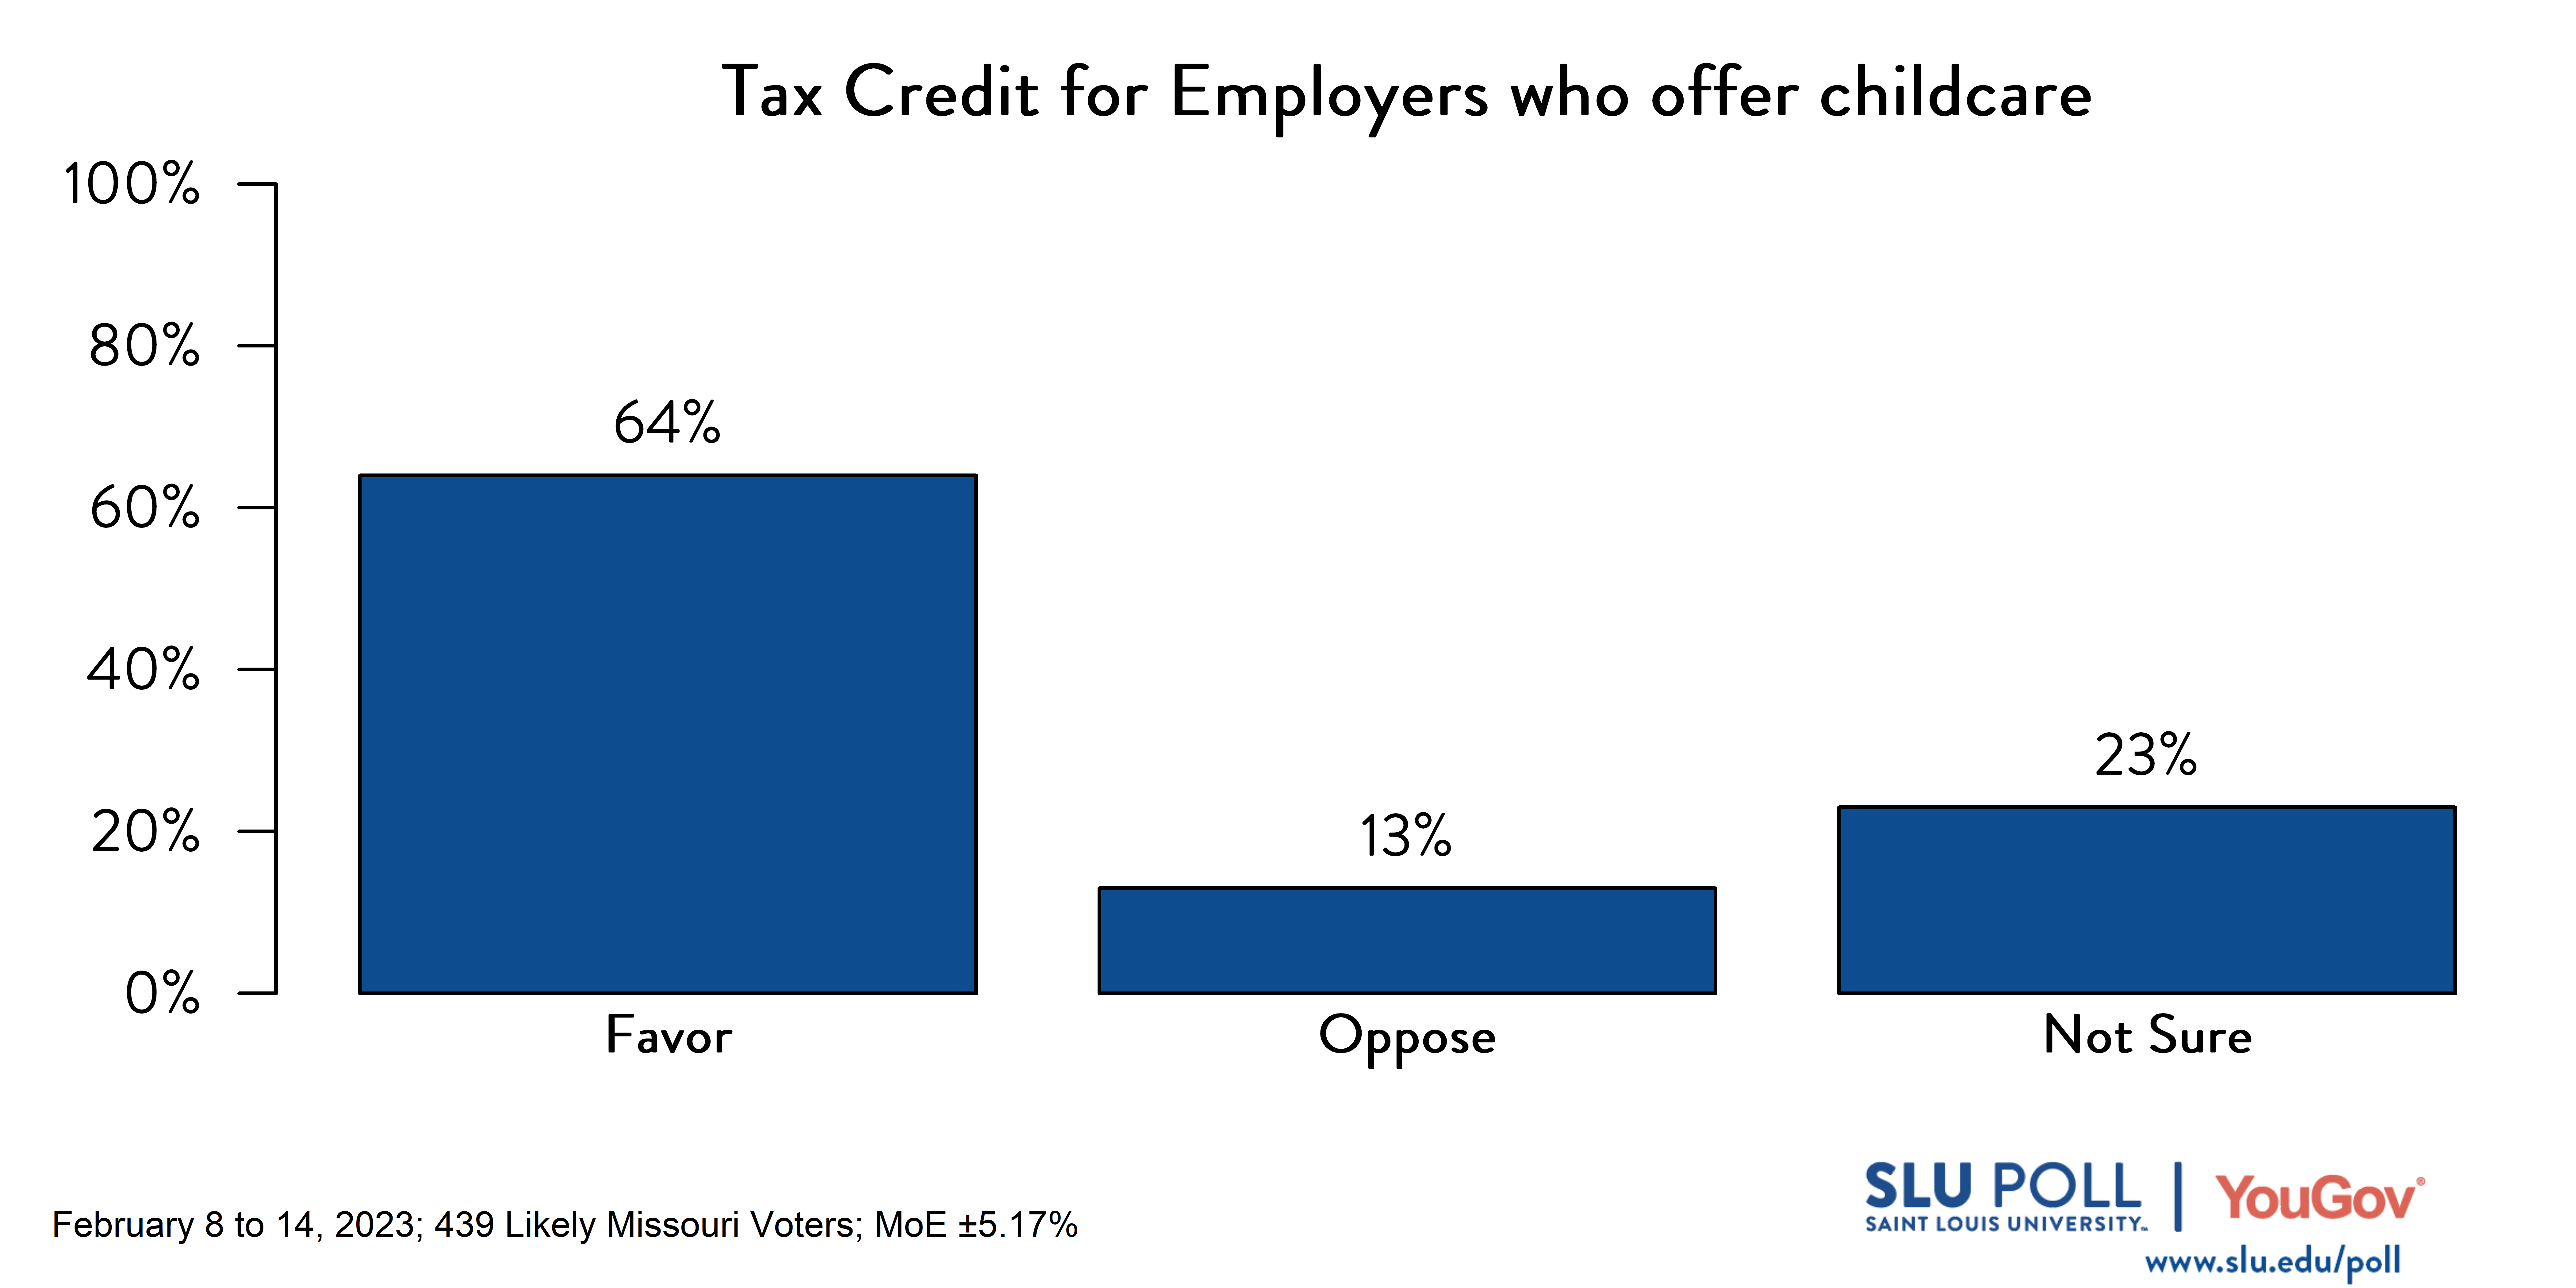 Likely voters' responses to 'Do you favor or oppose the following policies: Employers who provide childcare assistance should receive a state tax credit for 30 percent of expenses paid to a childcare facility?': 64% Favor, 13% Oppose, and 23% Not sure.